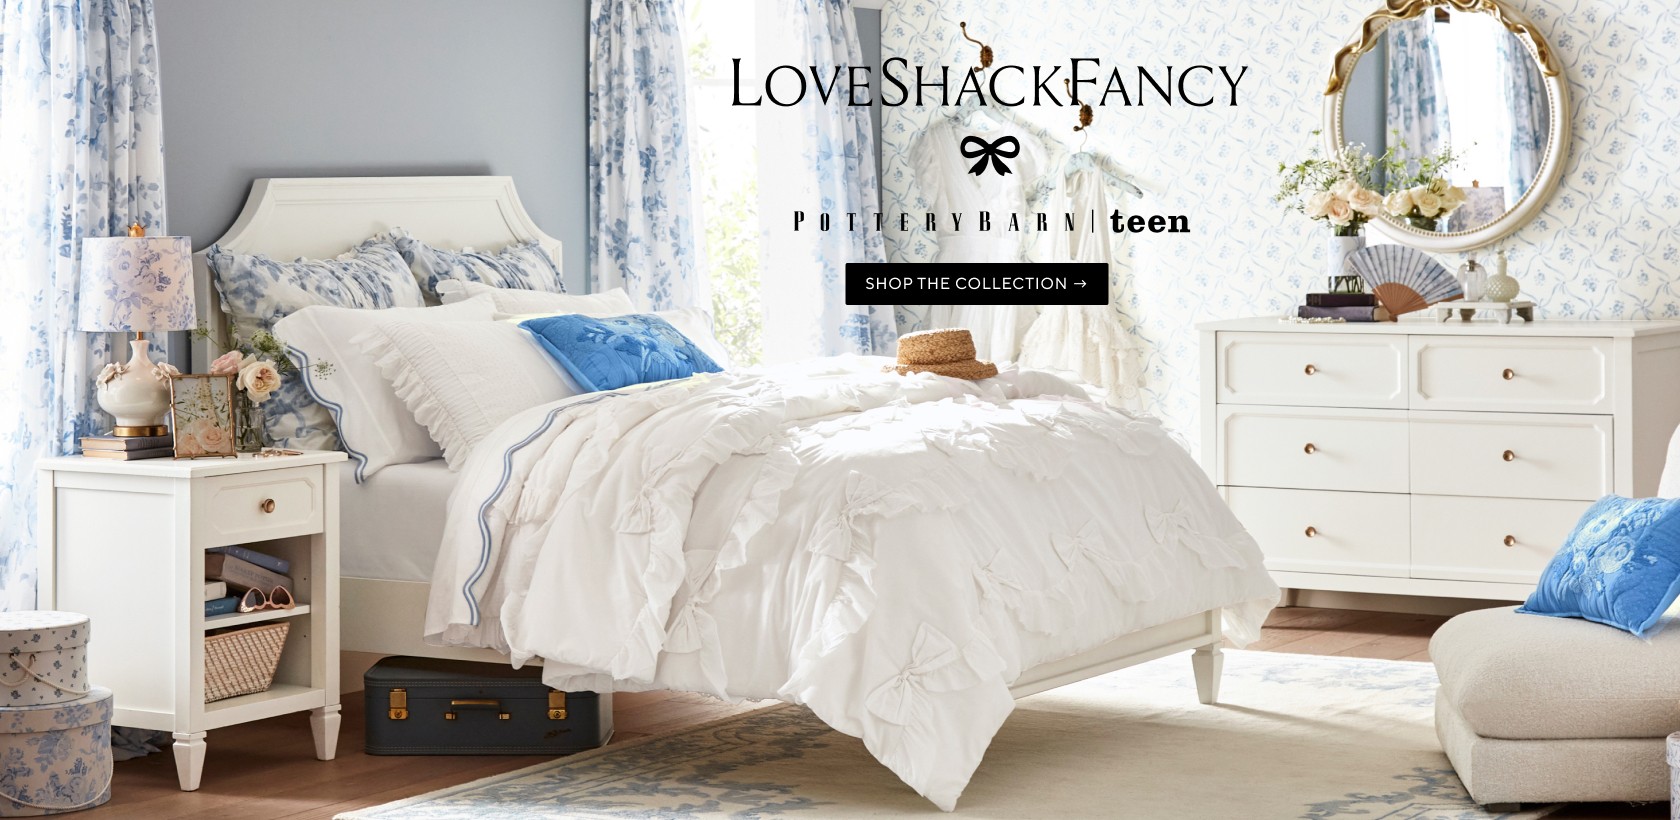 LoveShackFancy > Shop the Collection